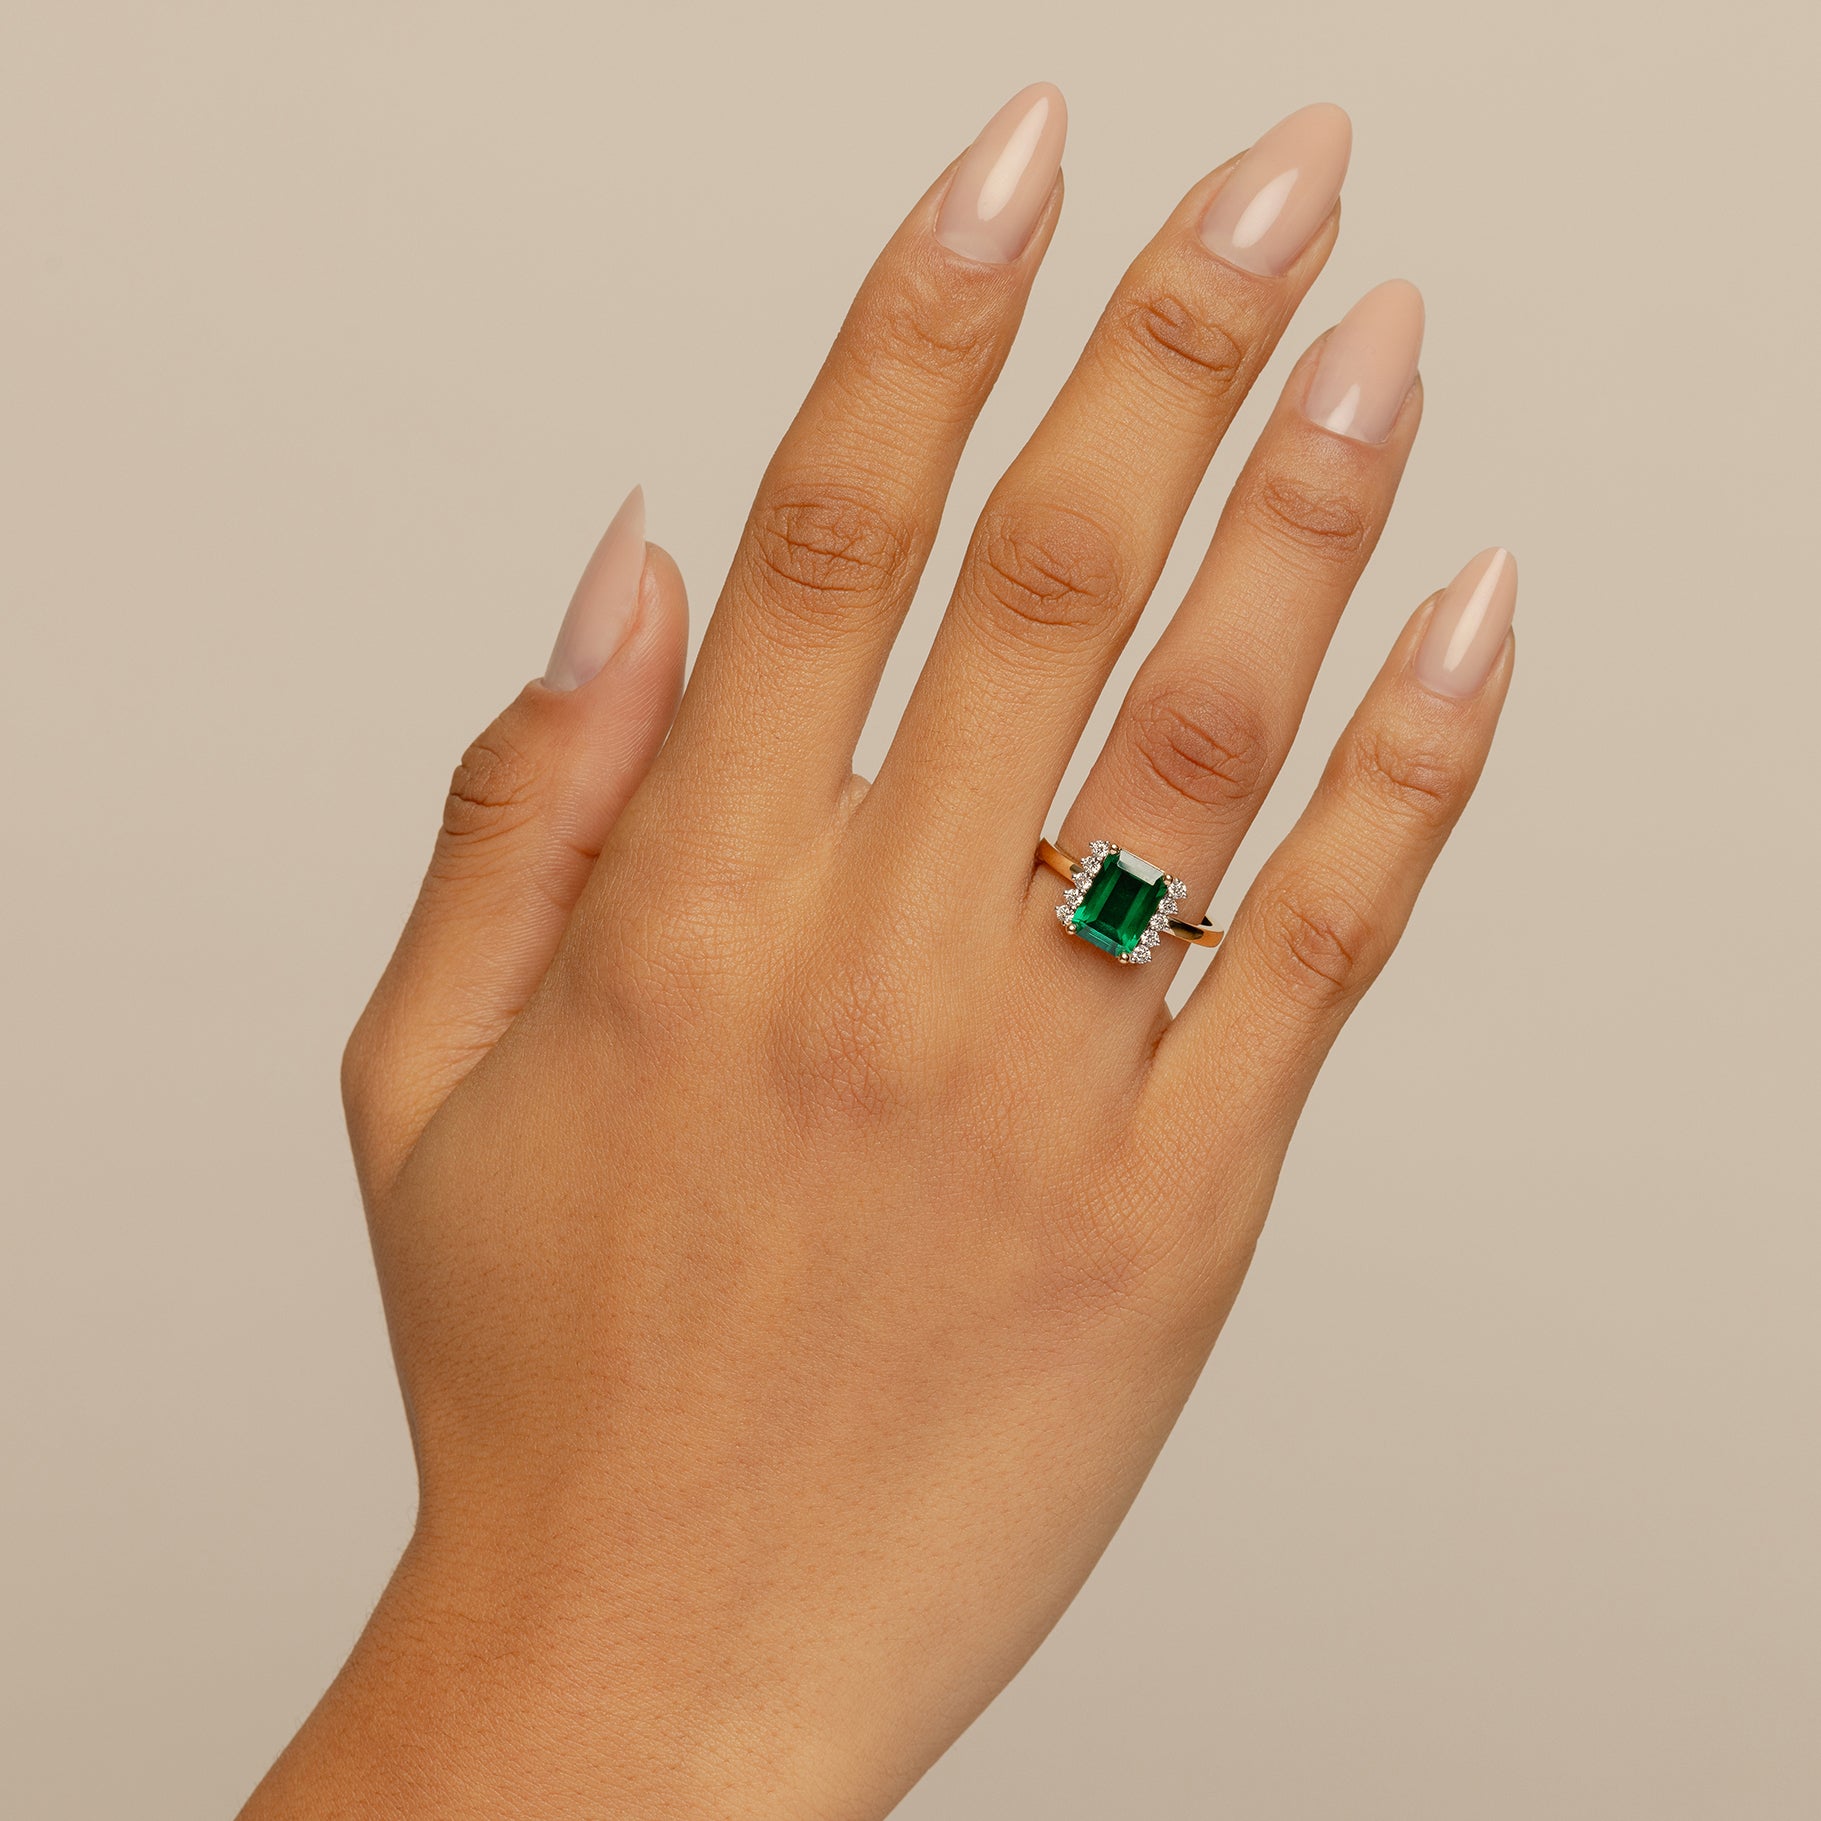 Buy Emerald Cut Natural Emerald and Diamond Engagement Ring in 14k Solid  Gold / May Birthstone Gift Ring / Vivid Green Emerald Ring Online in India  - Etsy